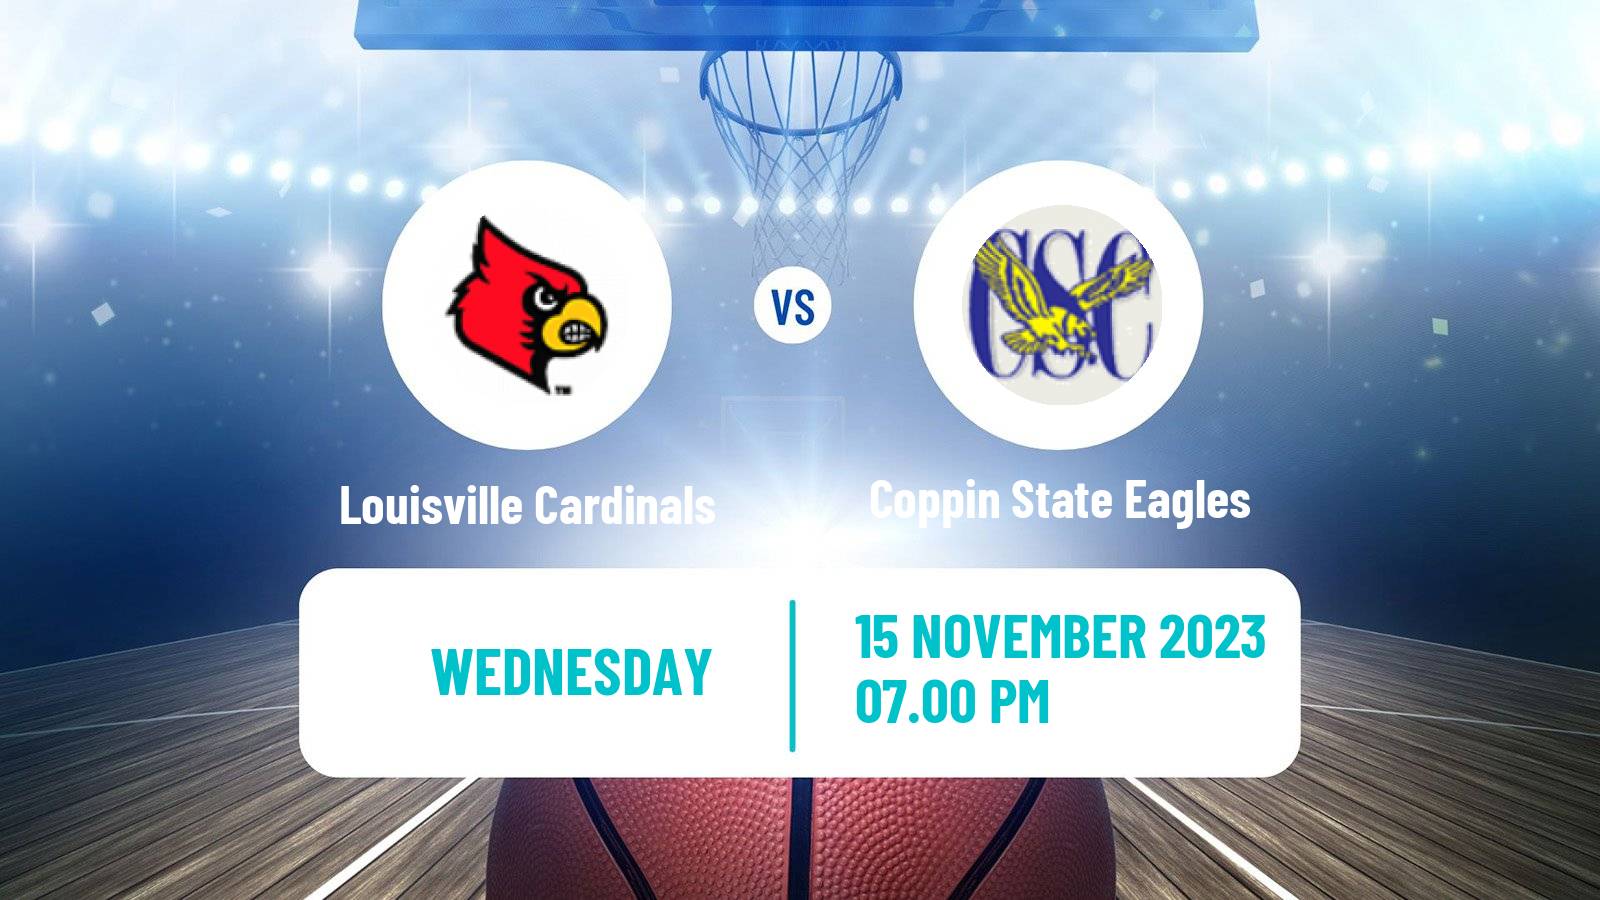 Basketball NCAA College Basketball Louisville Cardinals - Coppin State Eagles